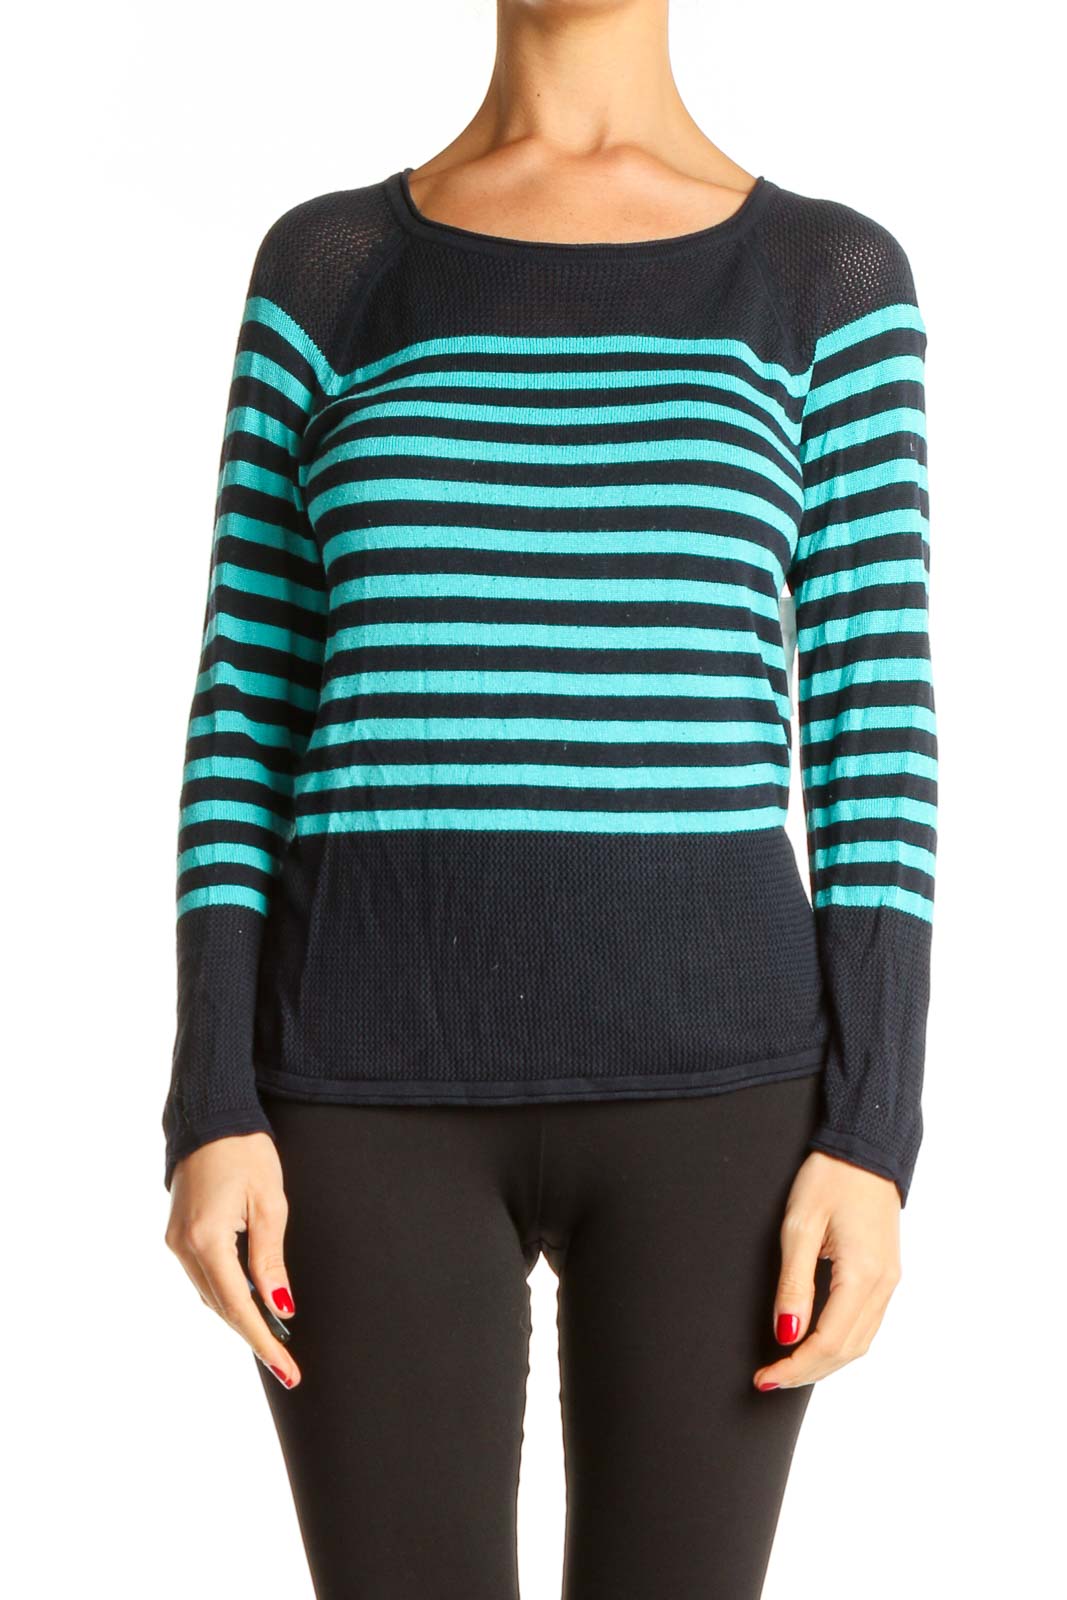 Blue Striped Casual Top Front